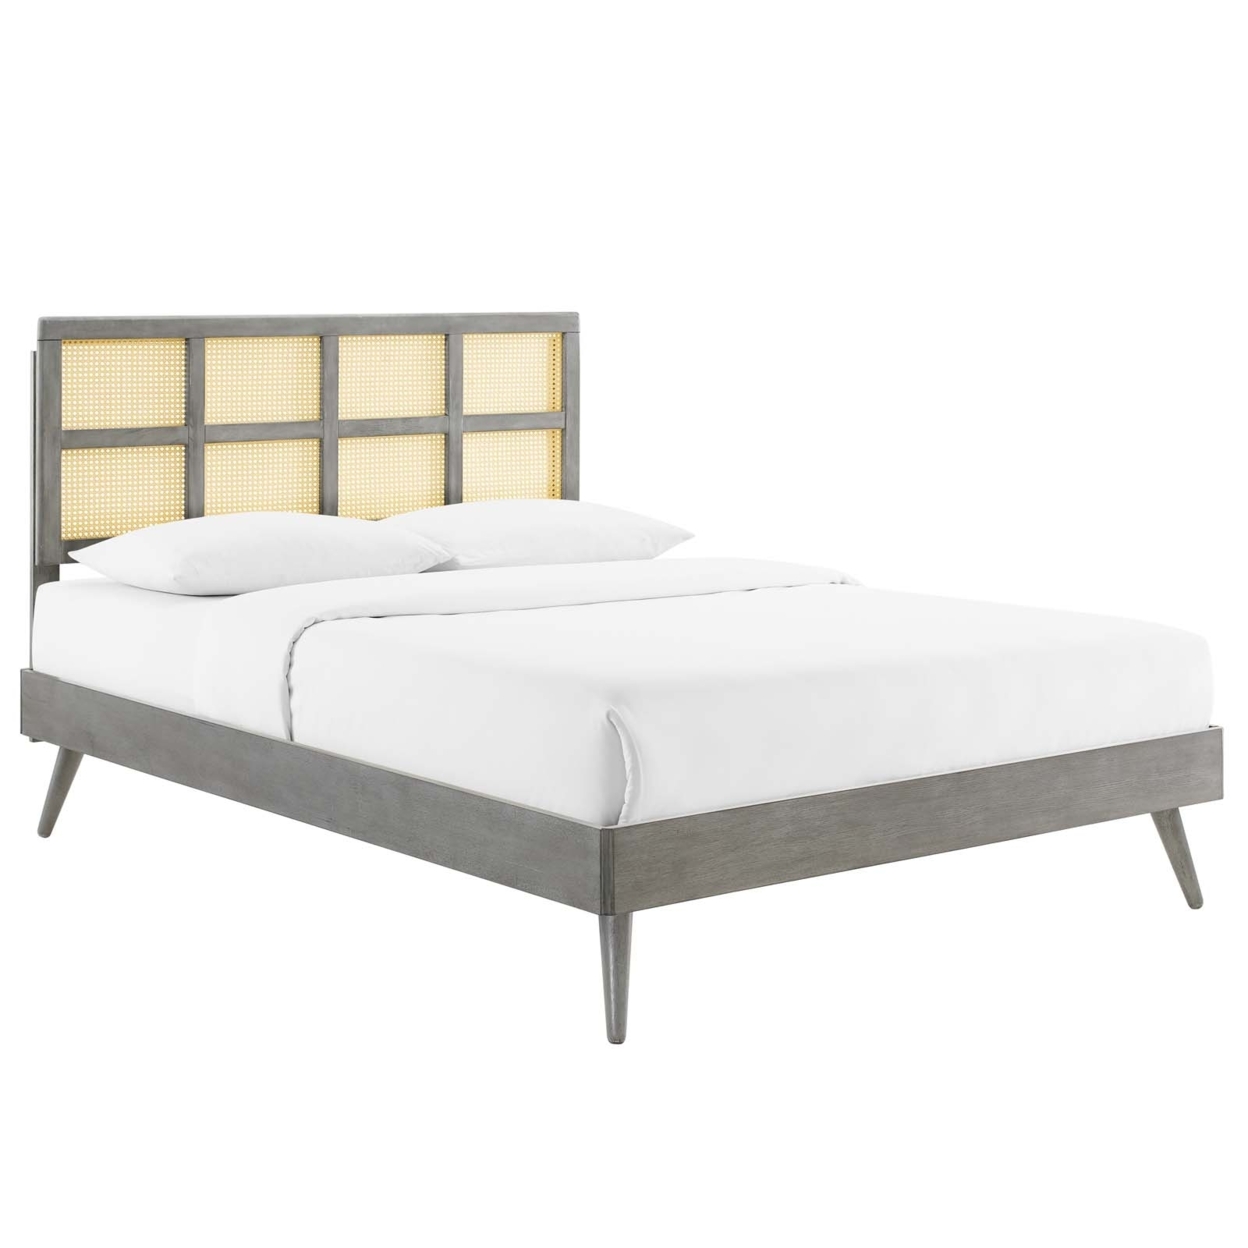 Sidney Cane And Wood Full Platform Bed With Splayed Legs, Gray